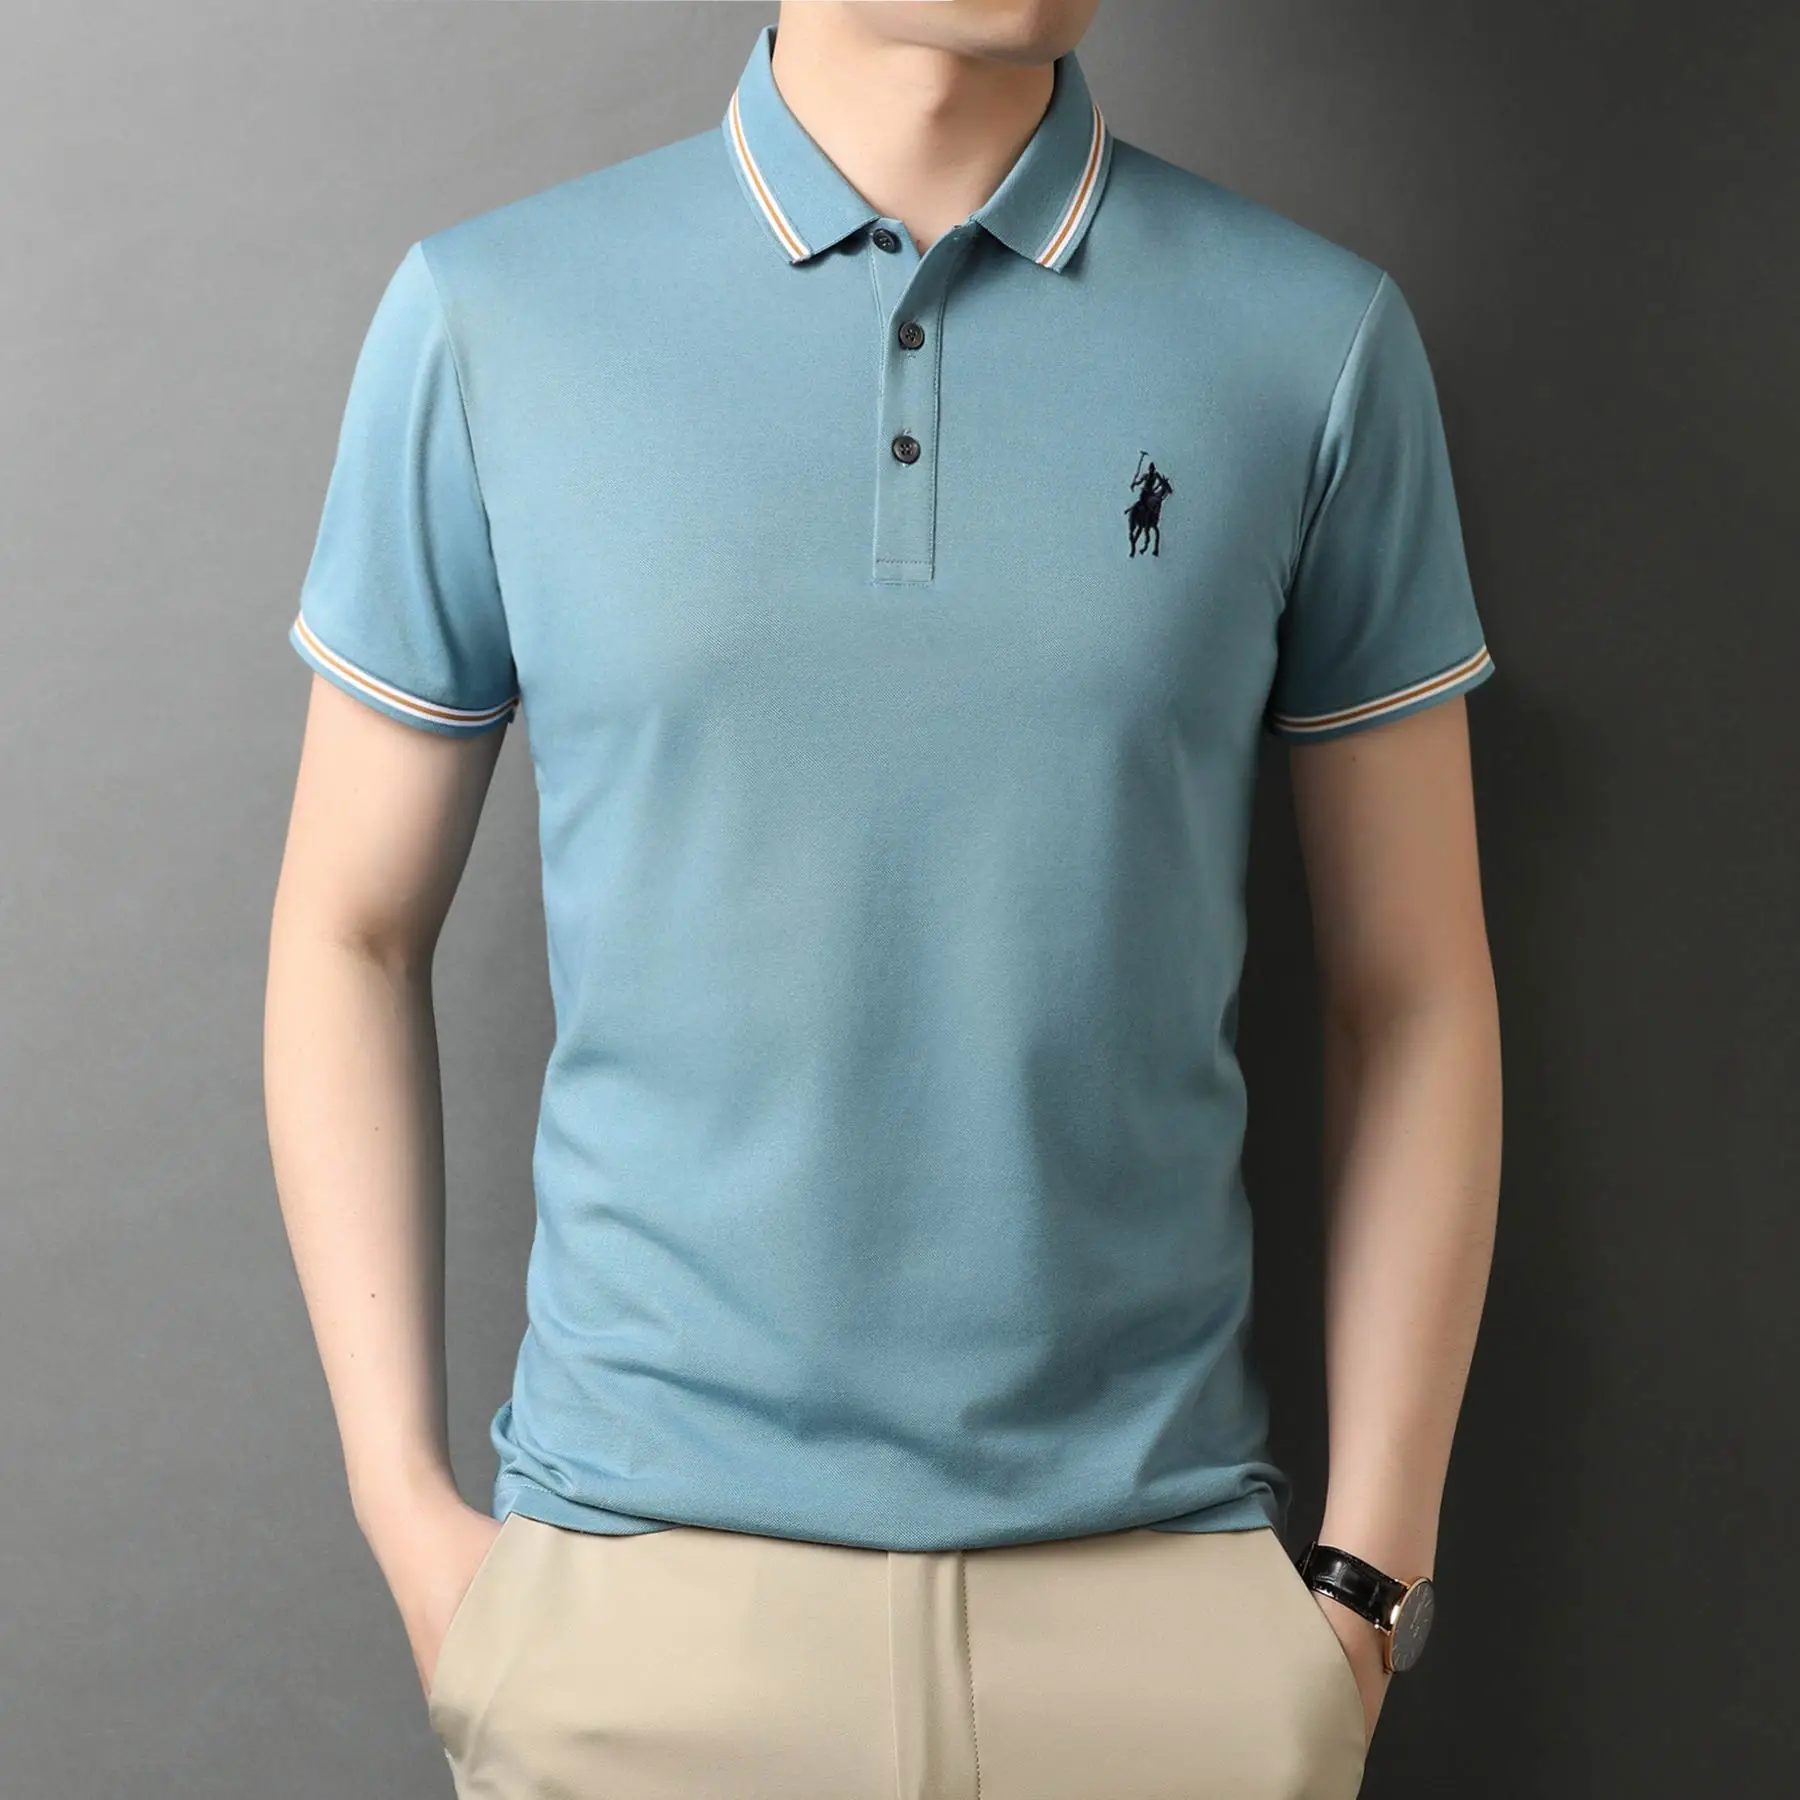 2018 New Fashion Brand Polo PU Leather Men\'s Business Casual